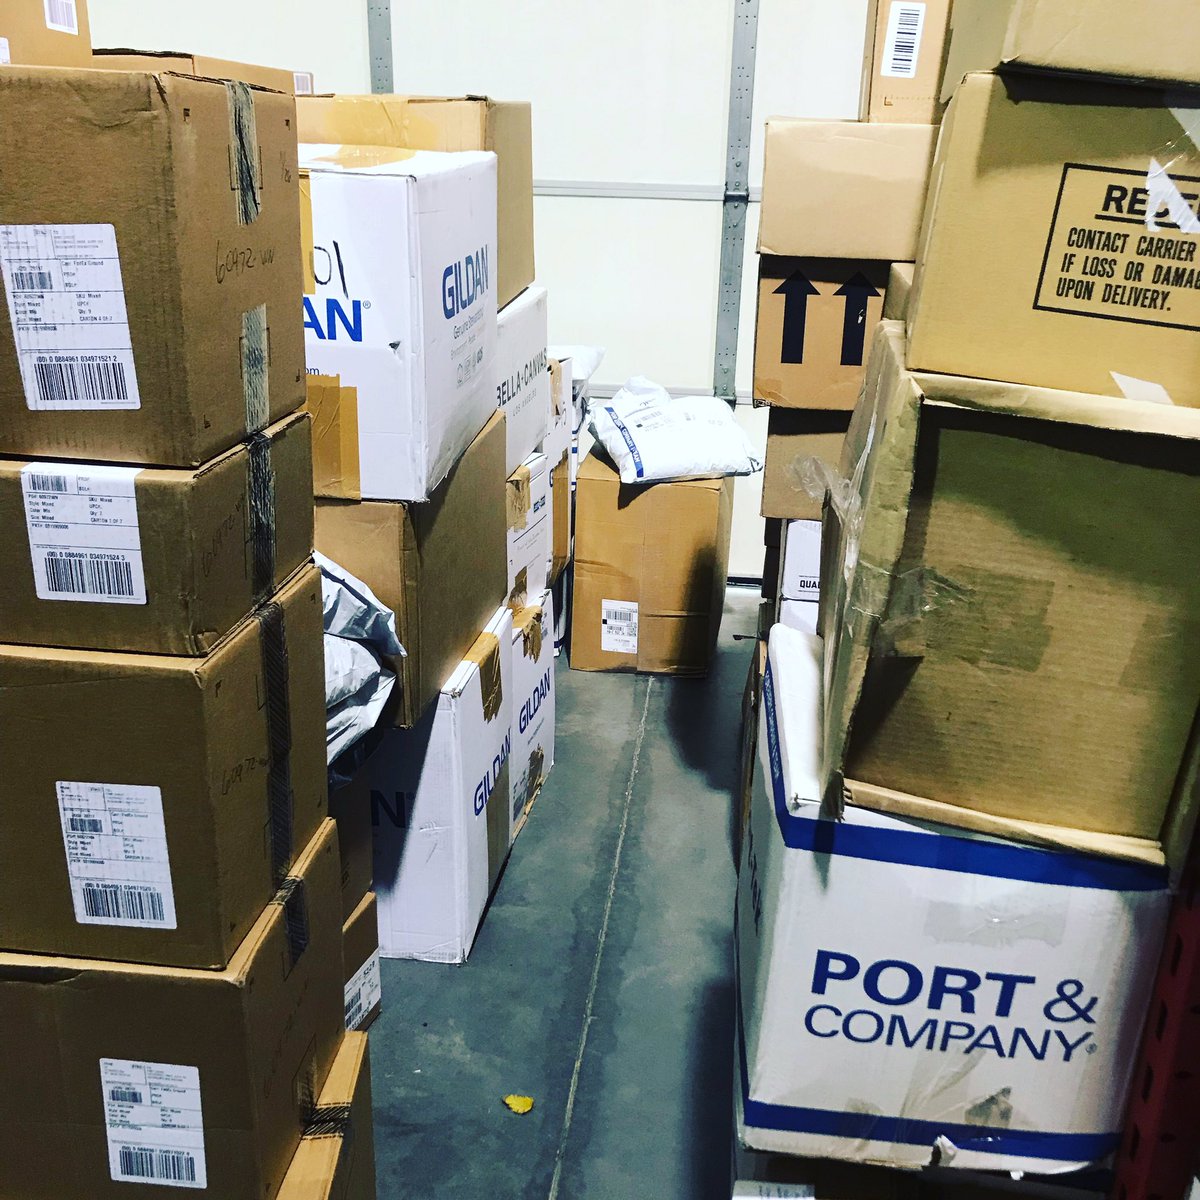 We have a ton of orders that have come in. Can’t wait to see all of these get printed. #screenprinting #embroidery #smallbusiness #veteranowned #shippingandreceiving